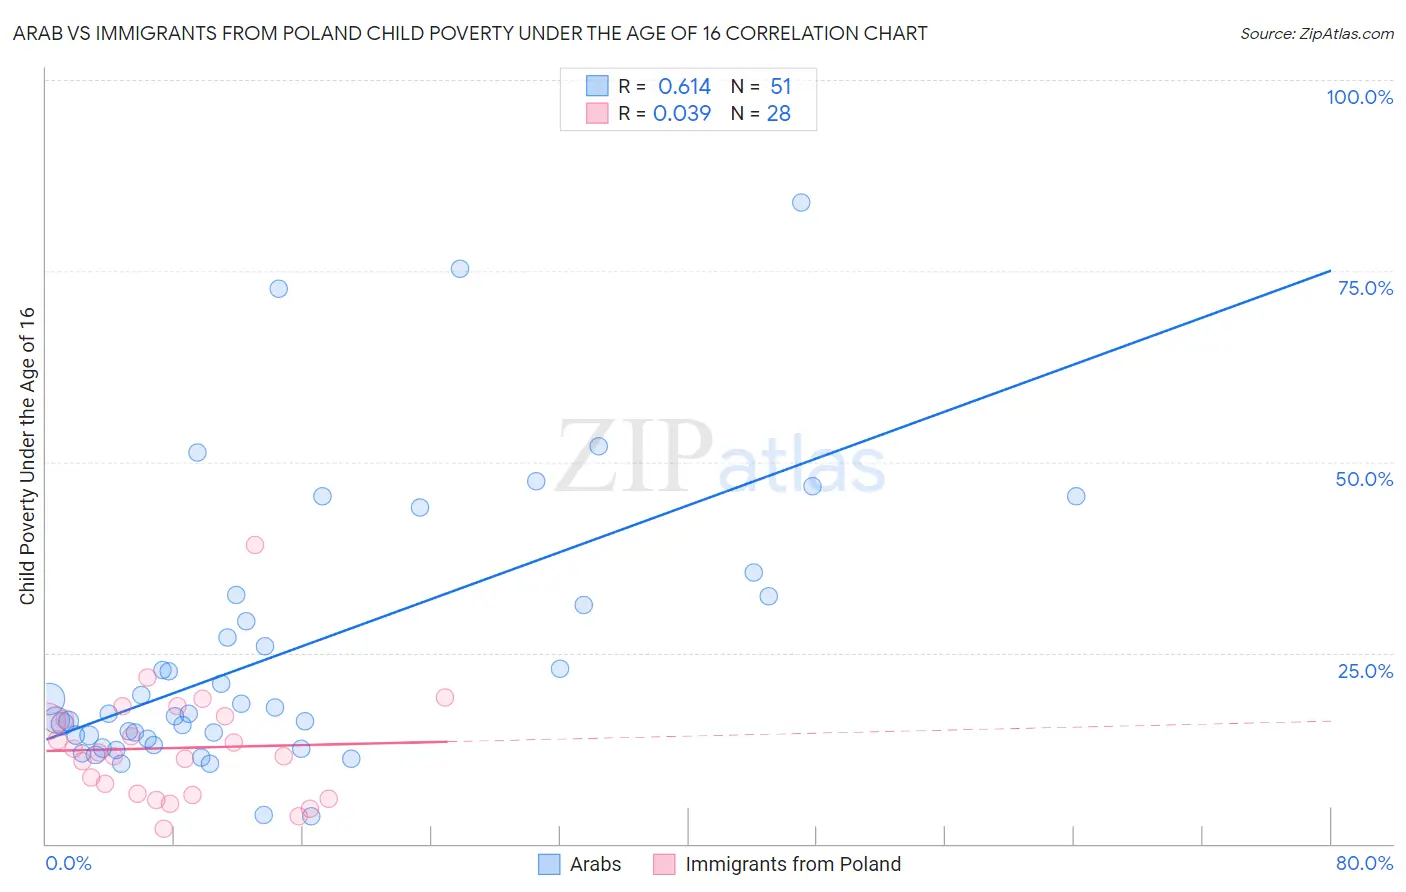 Arab vs Immigrants from Poland Child Poverty Under the Age of 16